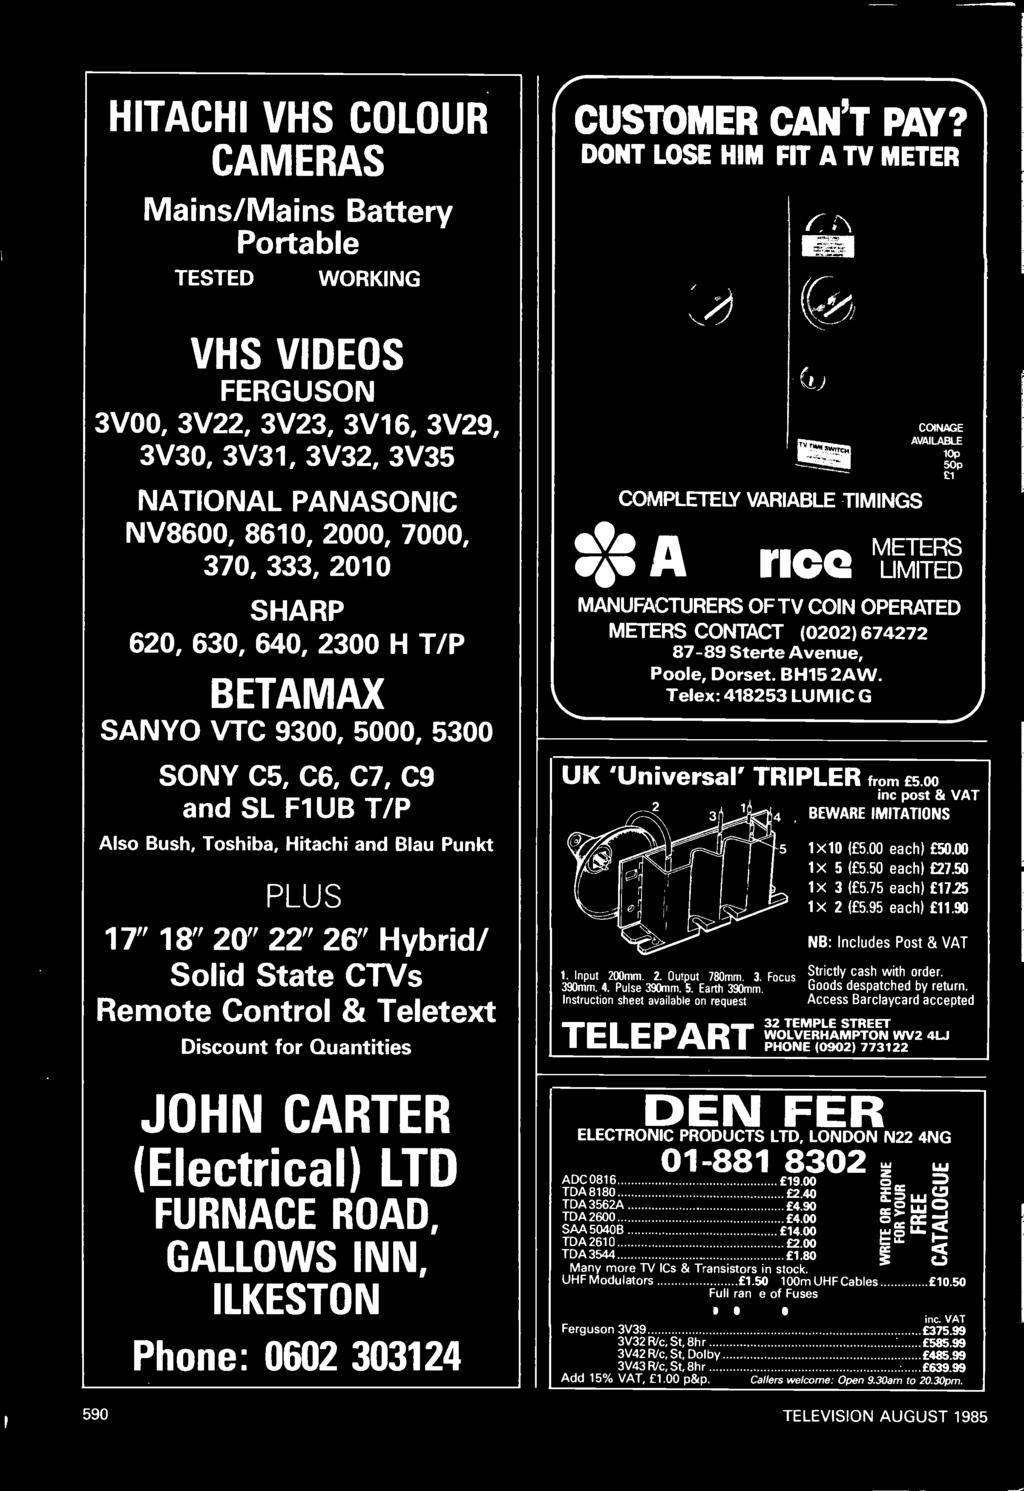 State CTVs Remote Control & Teletext Discount for Quantities JOHN CARTER (Electrical) LTD FURNACE ROAD, GALLOWS INN, ILKESTON Phone: 0602 303124 CUSTOMER DONT LOSE..._ r!iionnirli....,..7.fa.